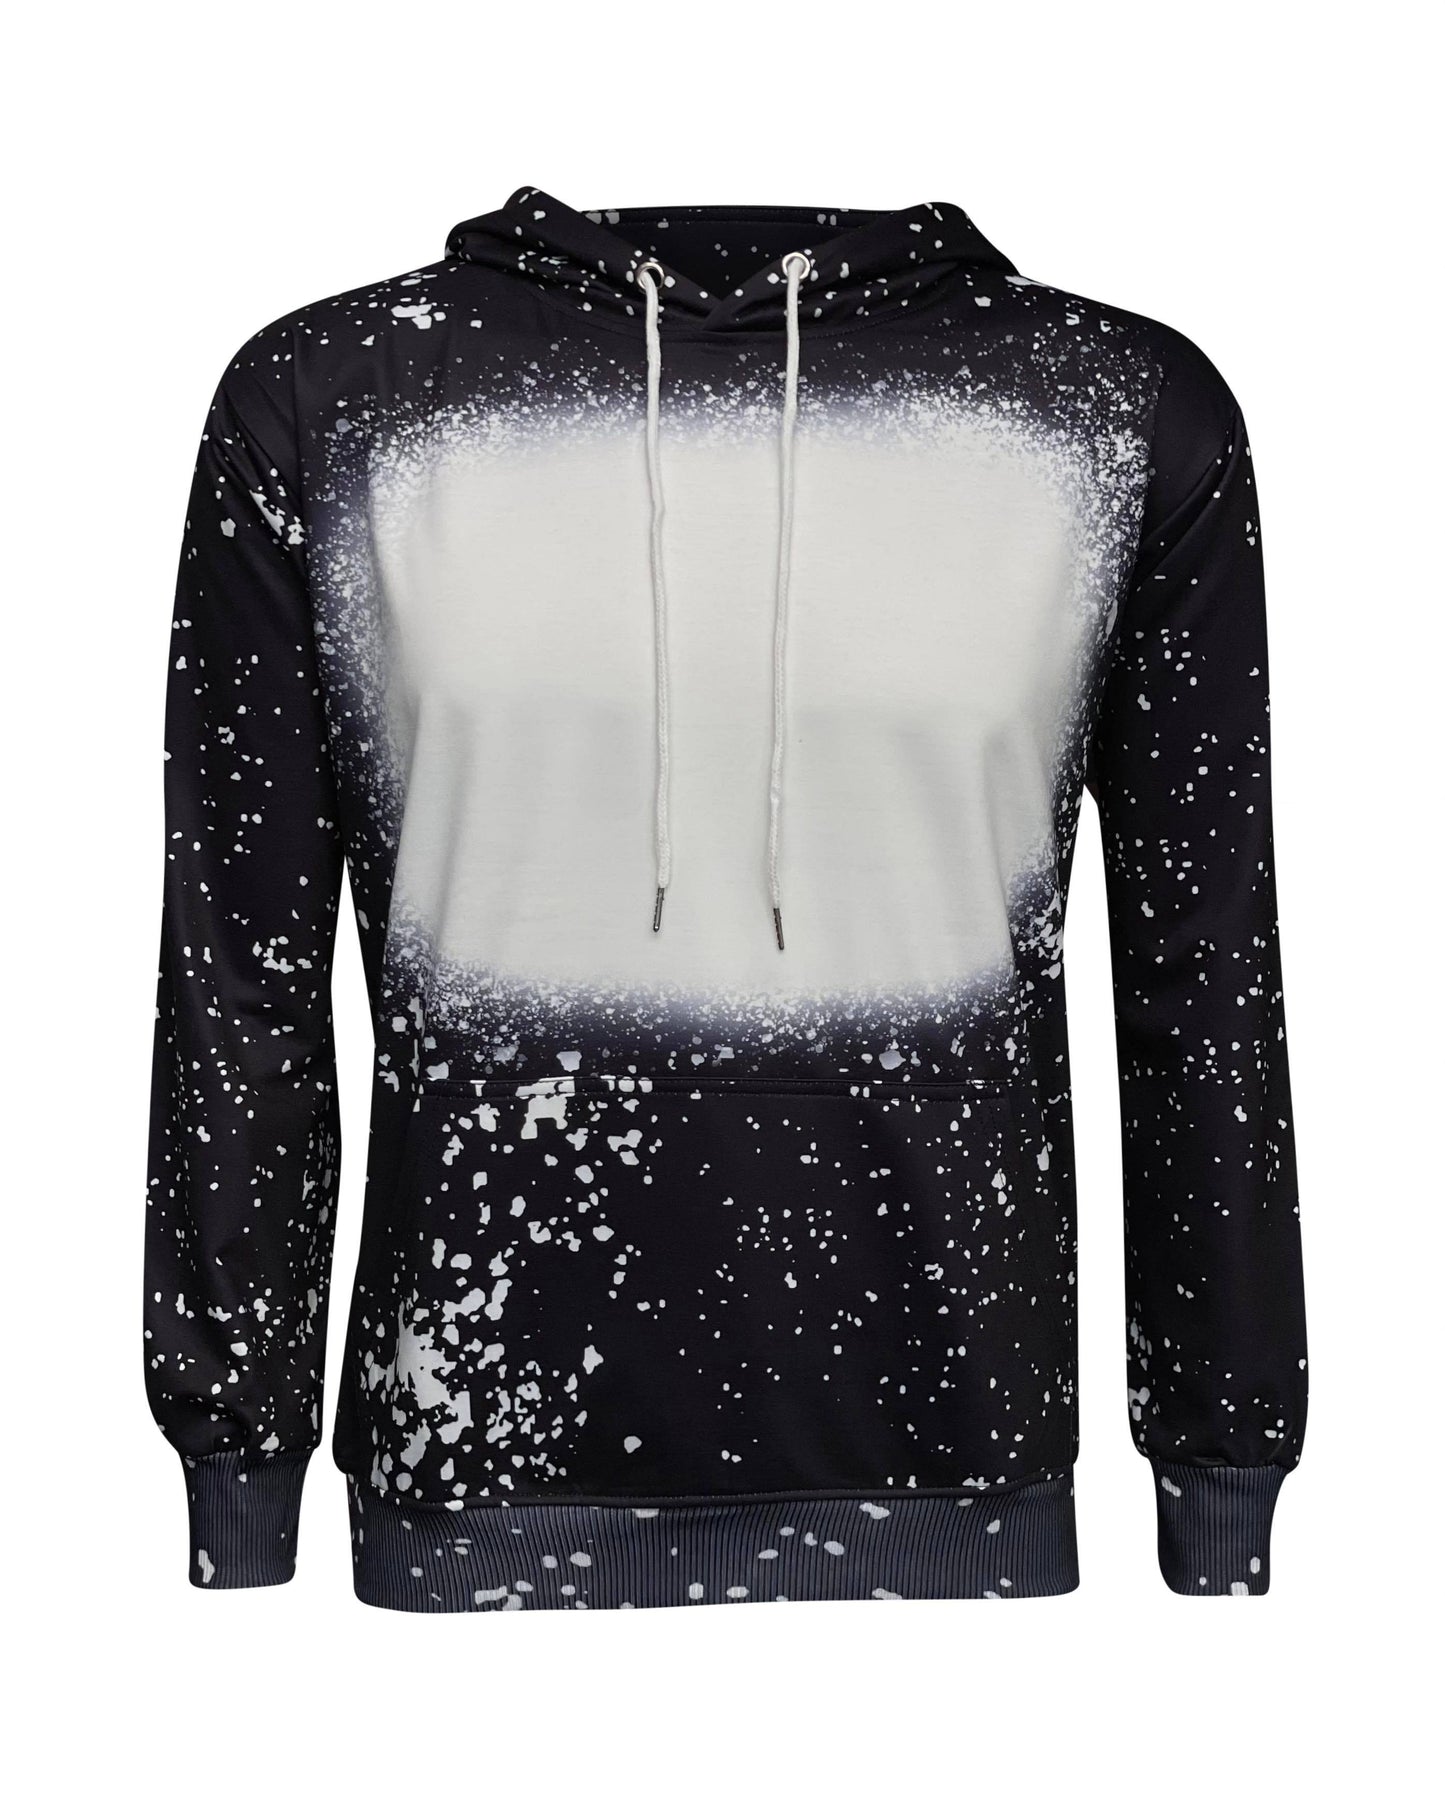 We Sub’N ️ Black Contrast Sublimation Hoodie Adult (3D Print Suggested, Black Bleeds Onto White) Large